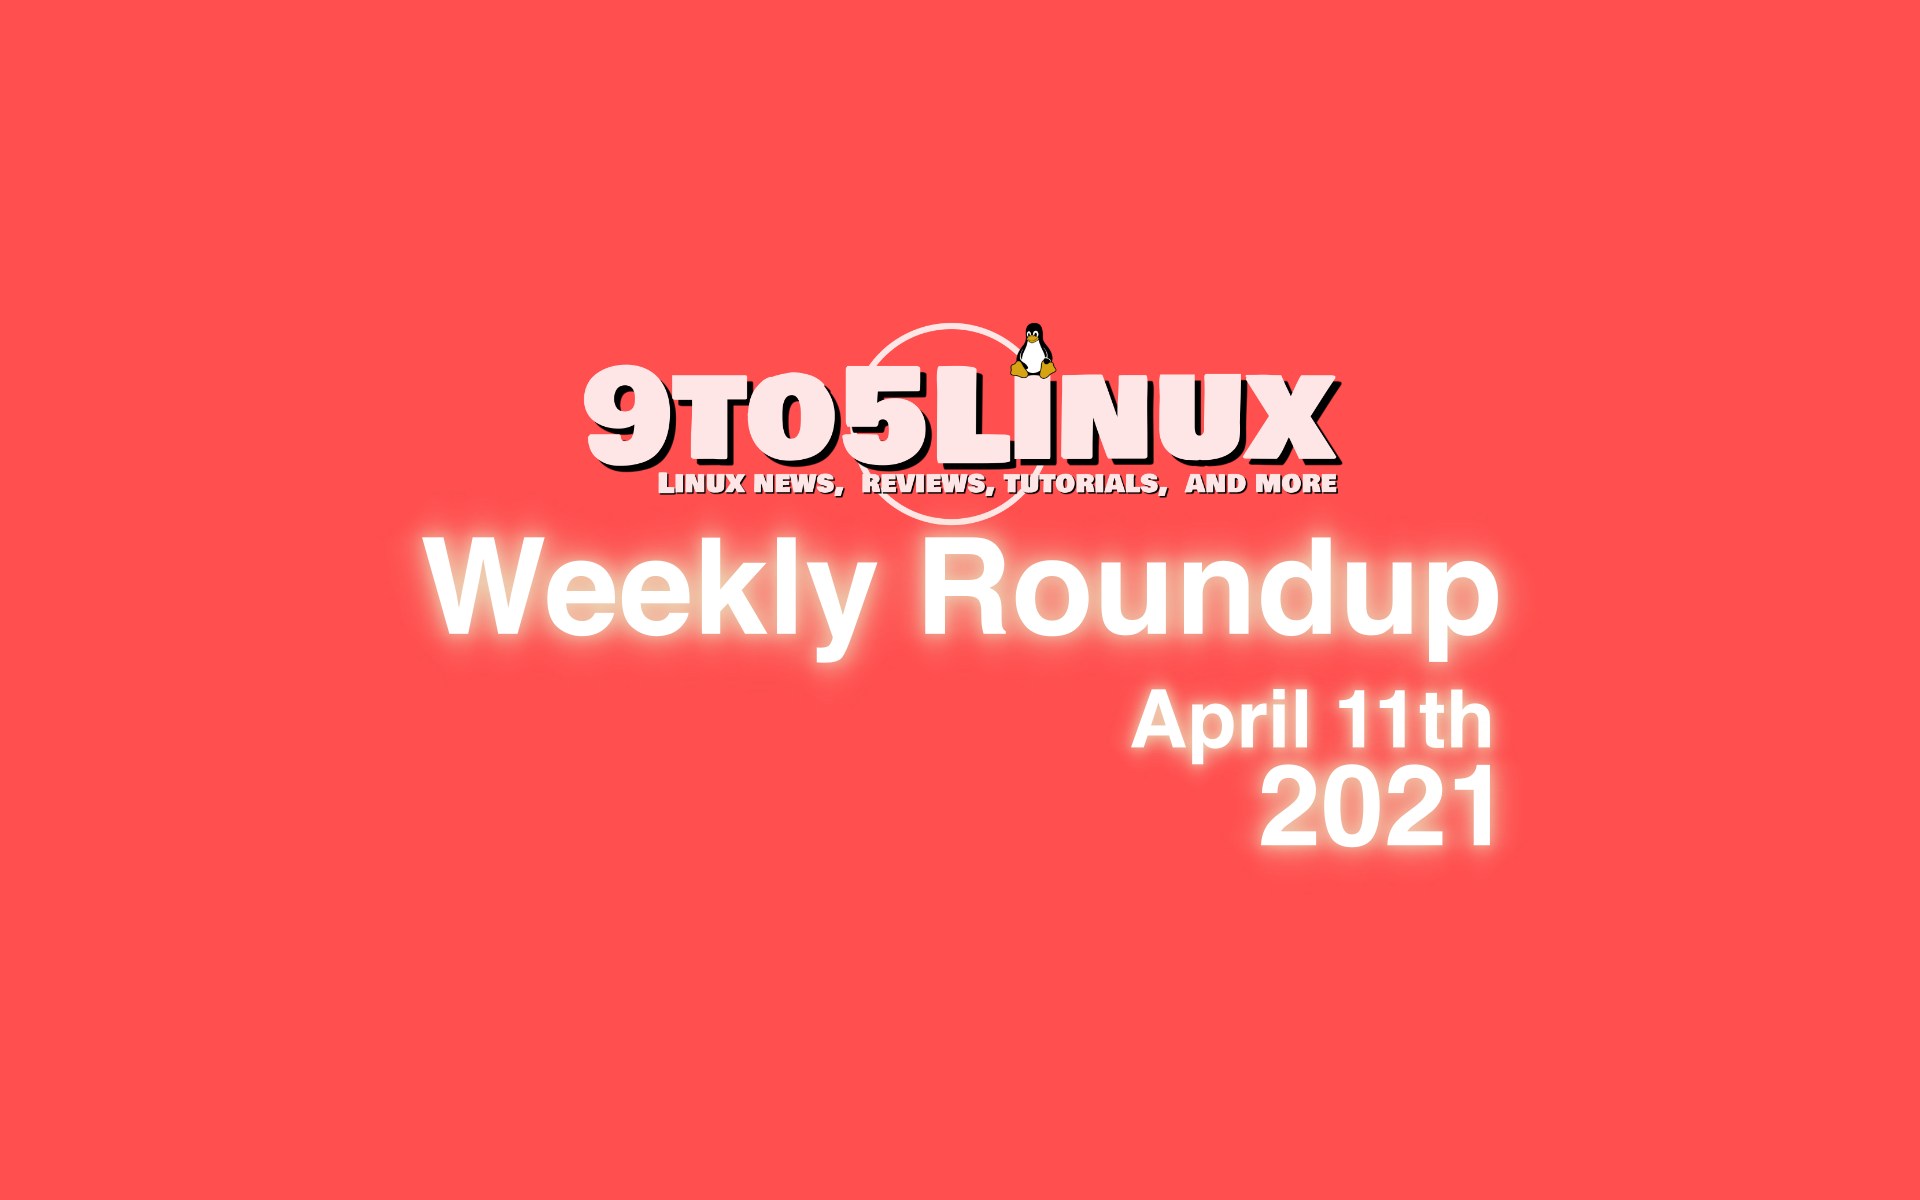 Weekly Roundup April 11th